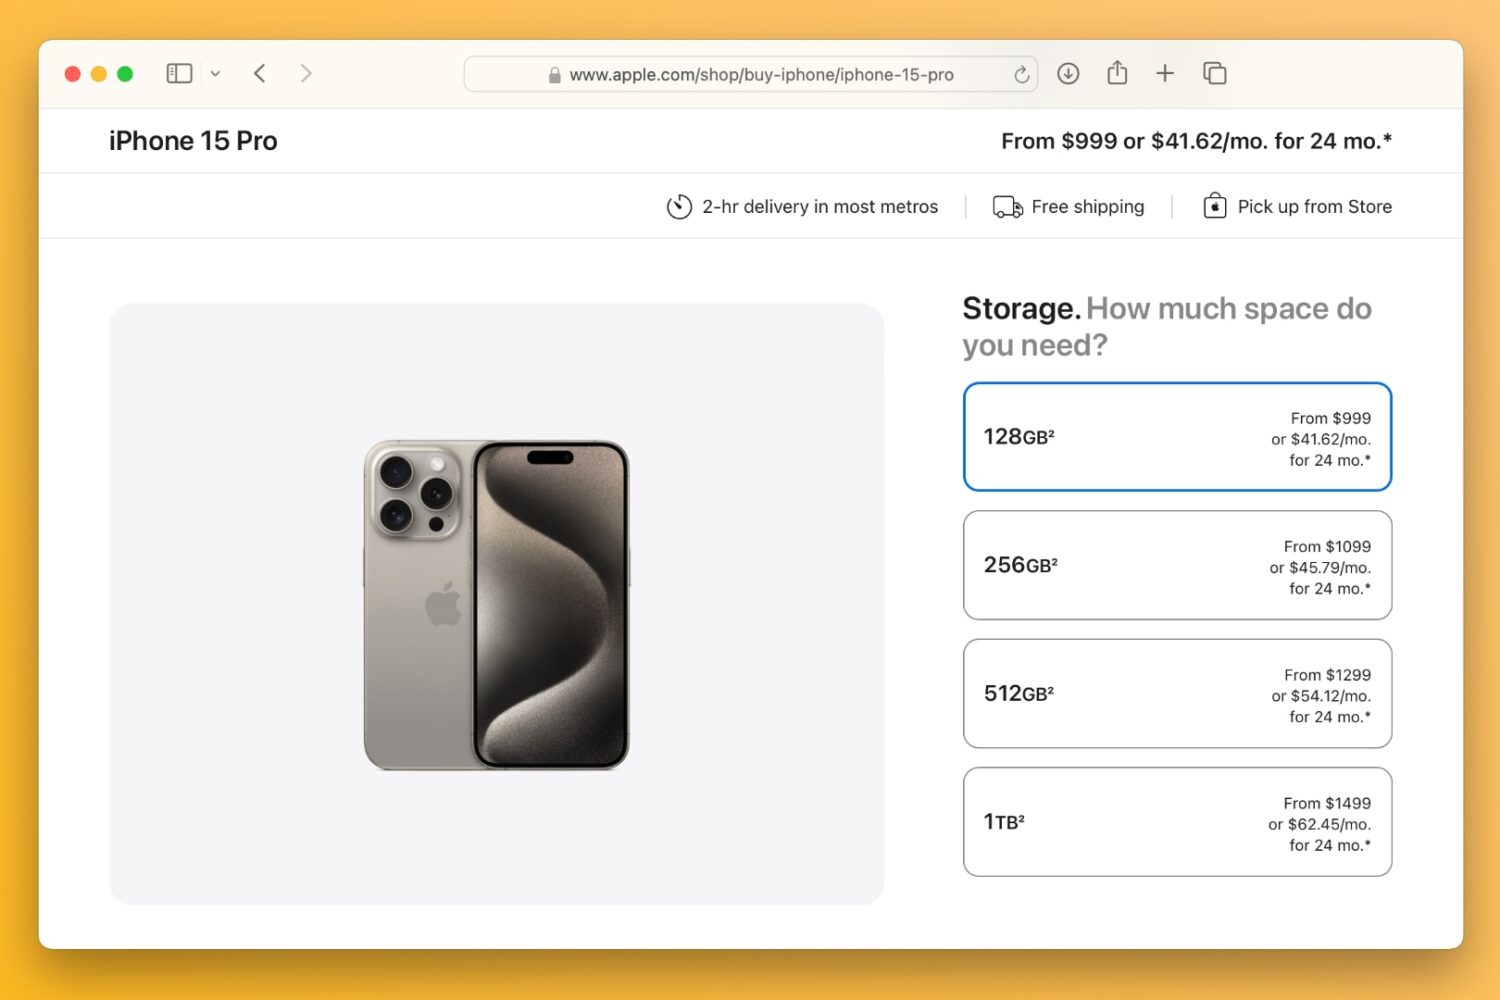 Apple's online store listing storage options for iPhone 15 Pro